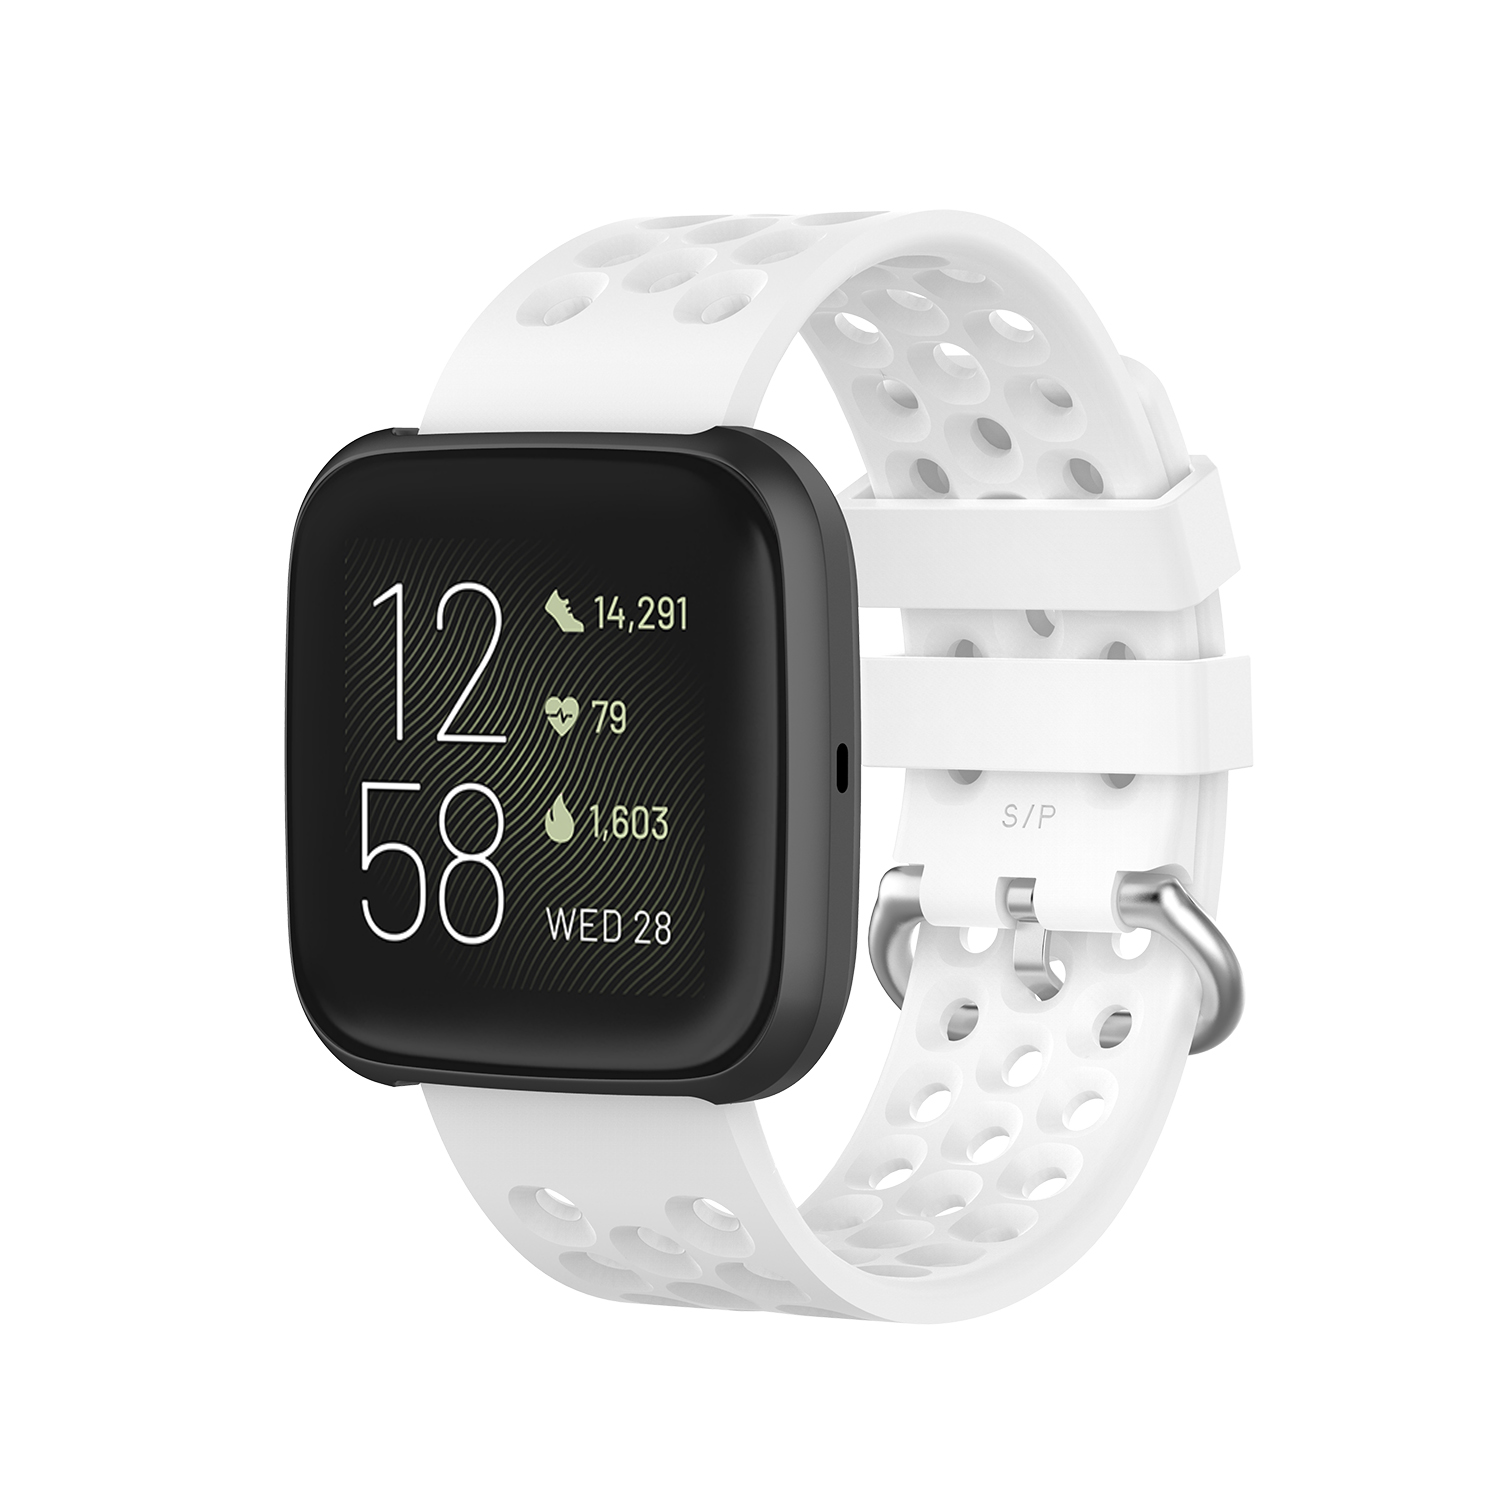 Fb.r49.22 Main White StrapsCo Perforated Silicone Rubber Watch Band Strap For Fitbit Versa